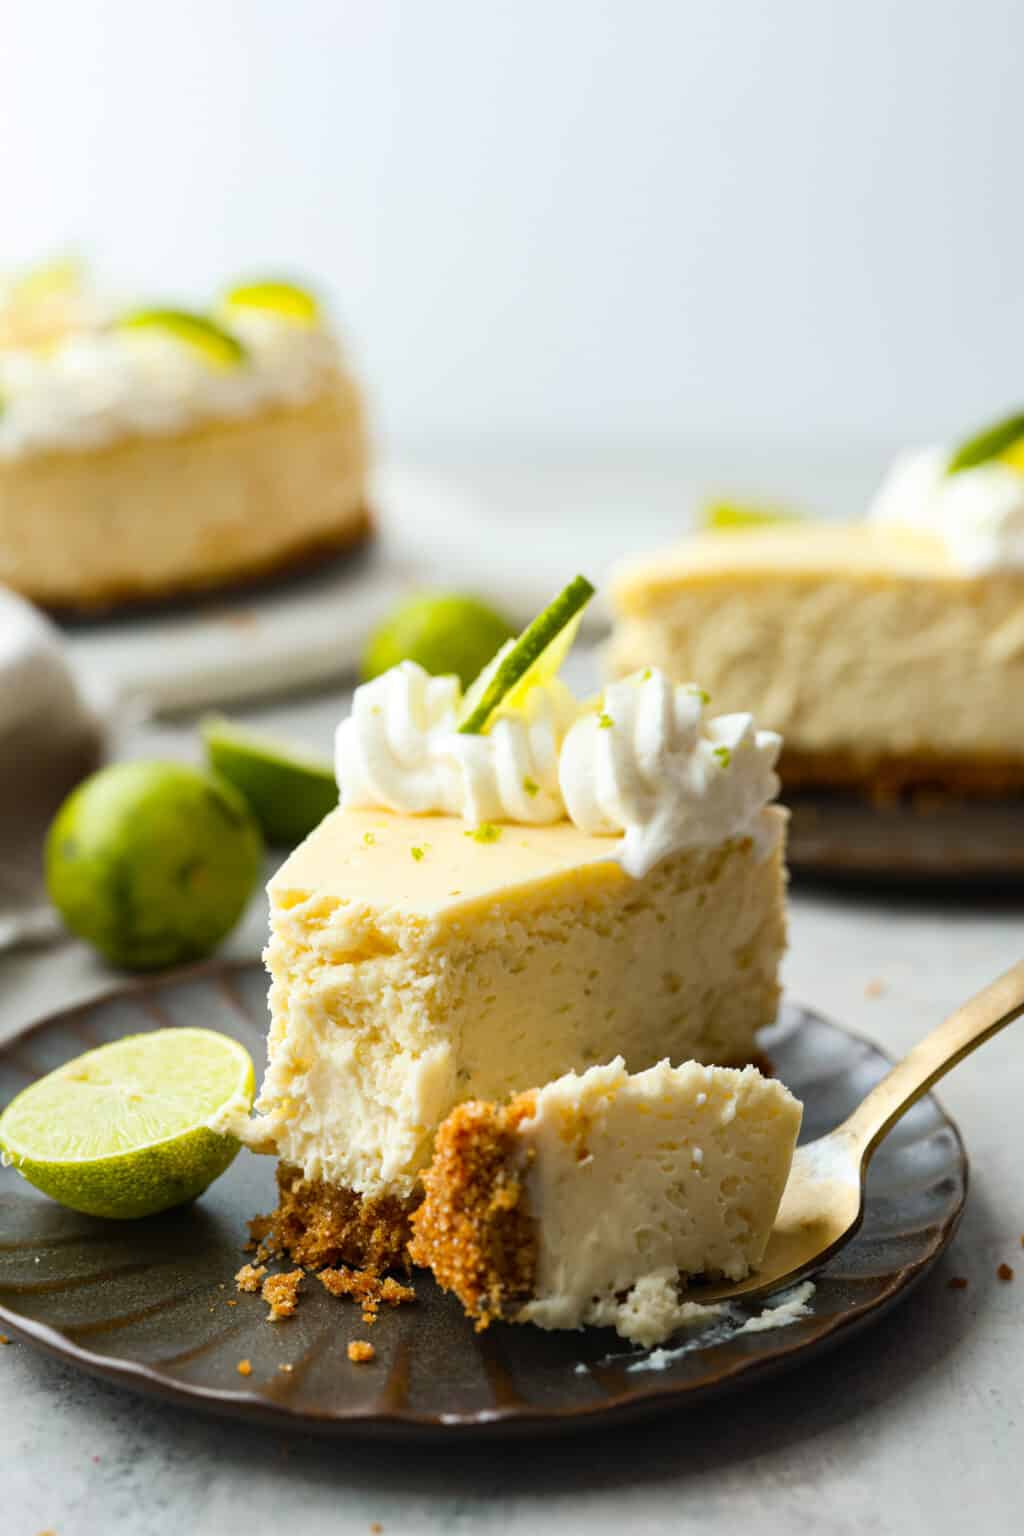 Easy Cheesecake Recipes for You to Enjoy! | The Recipe Critic